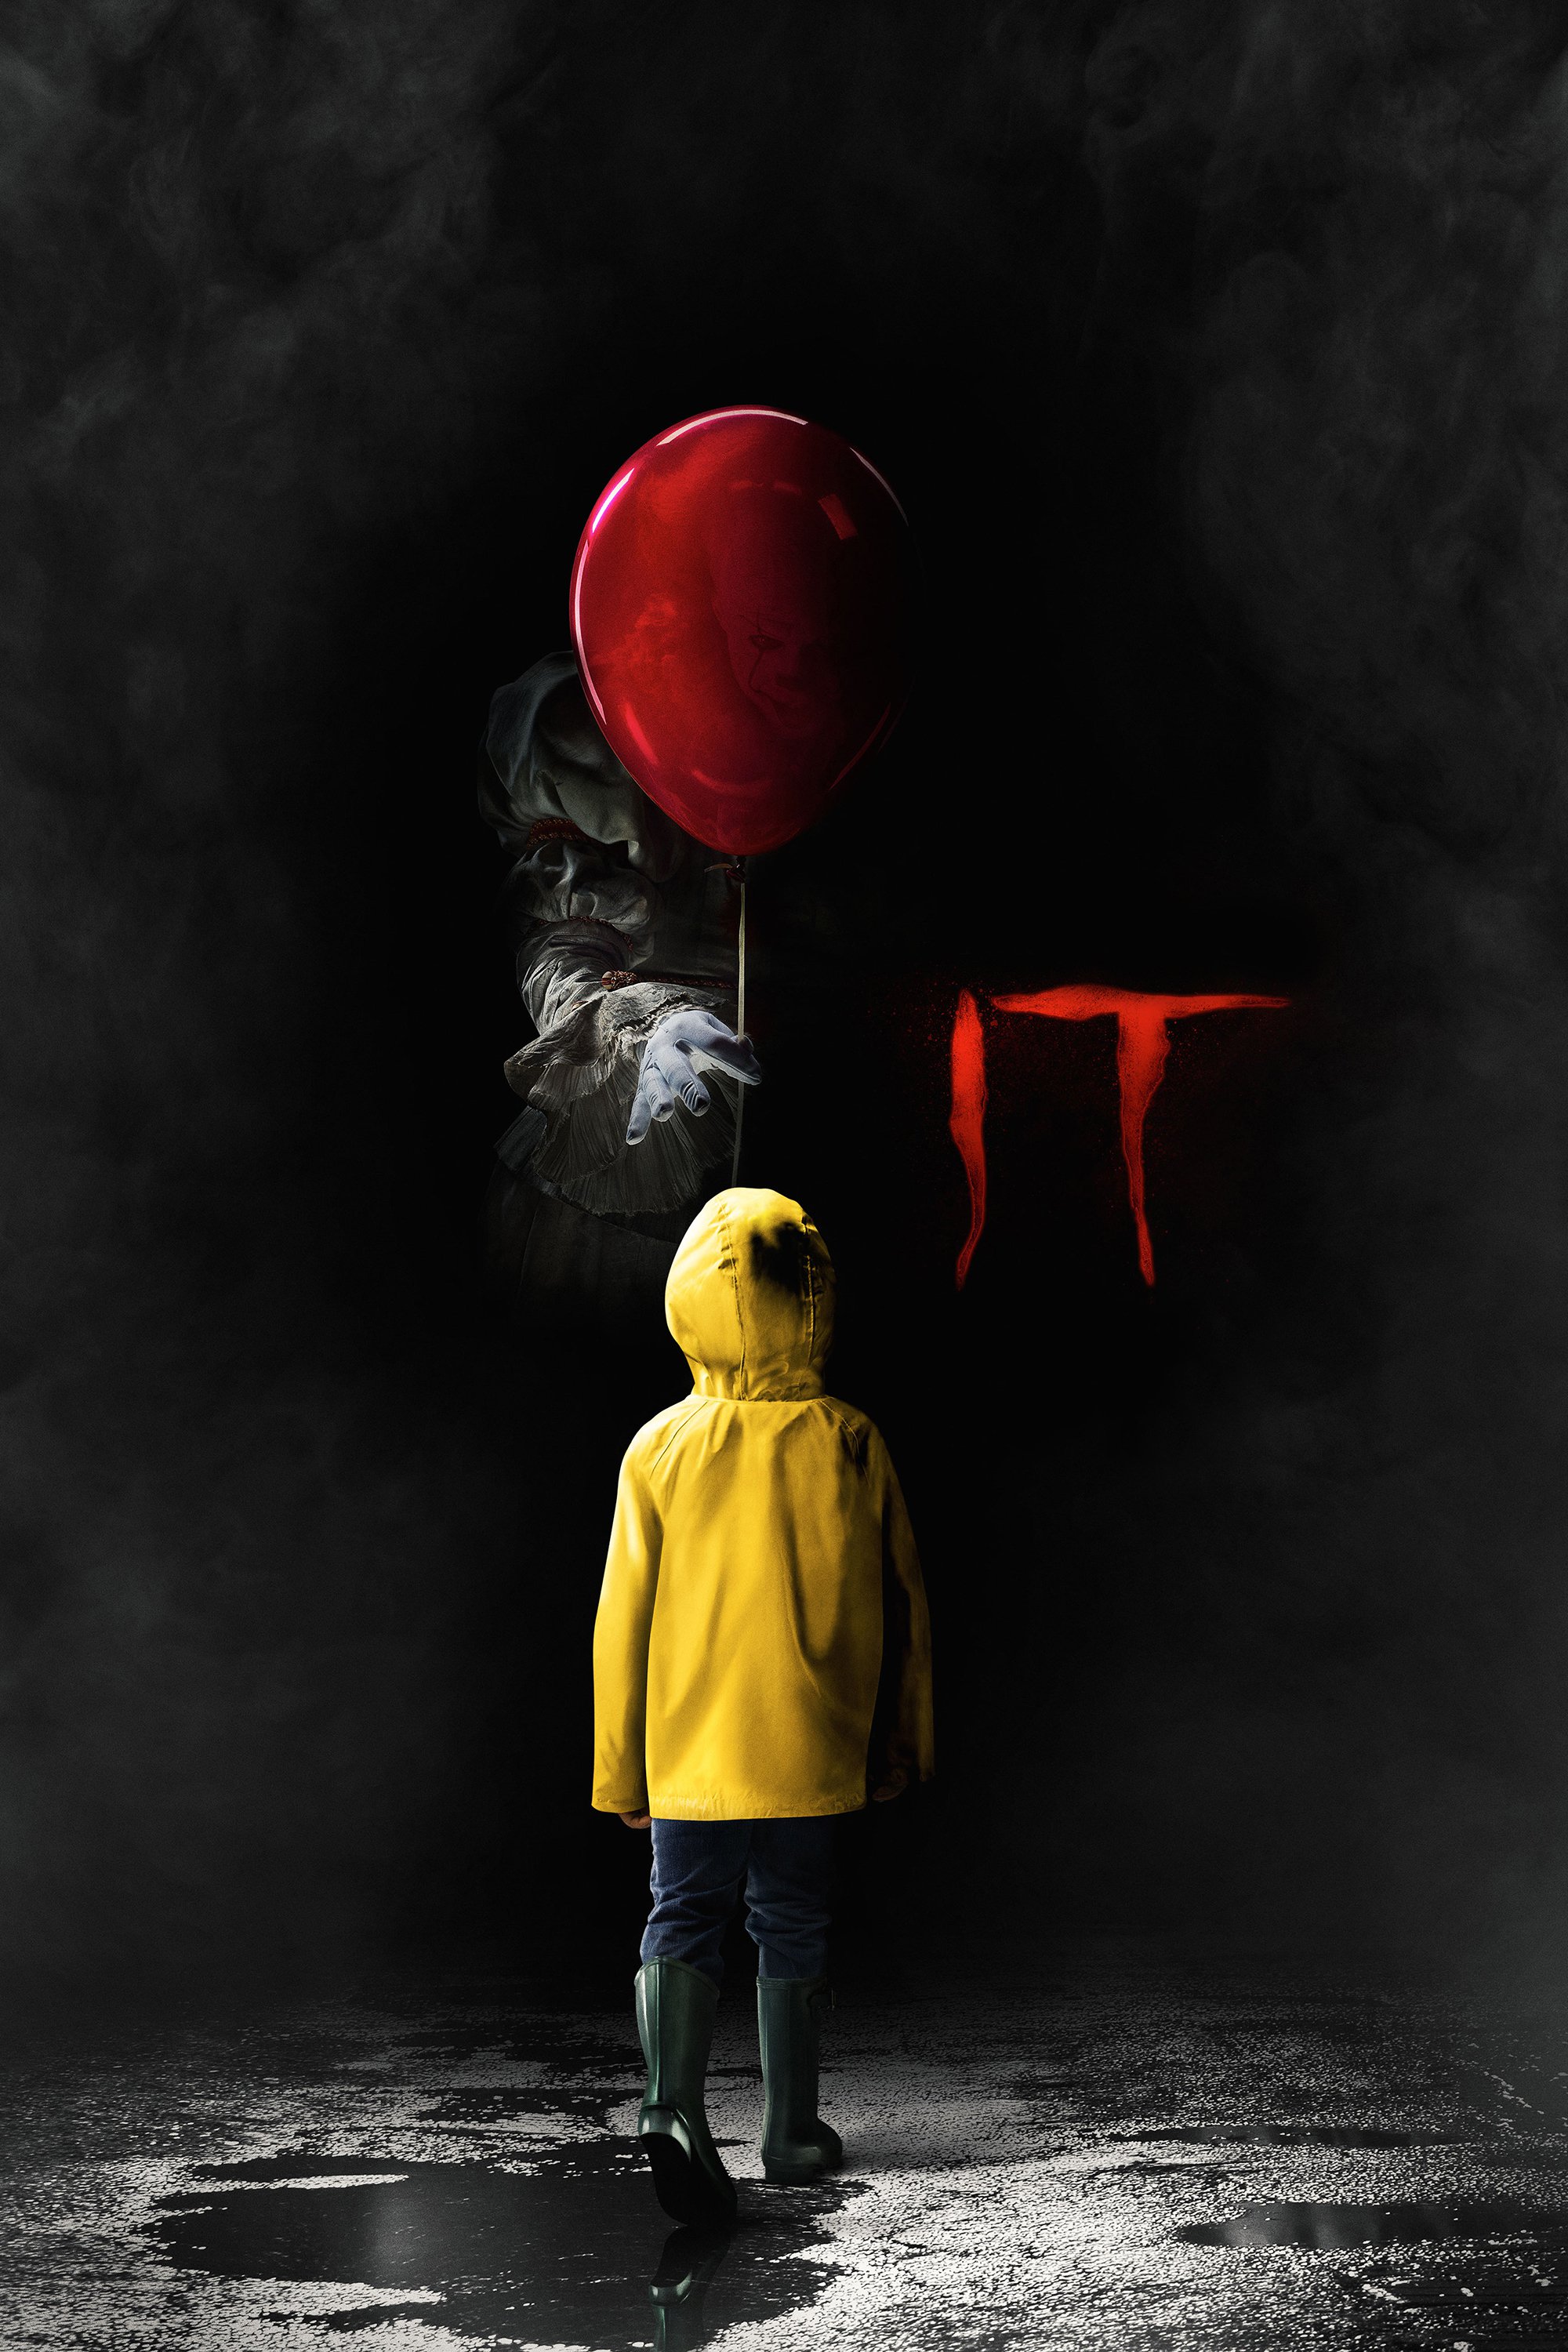 Poster for the movie "It"